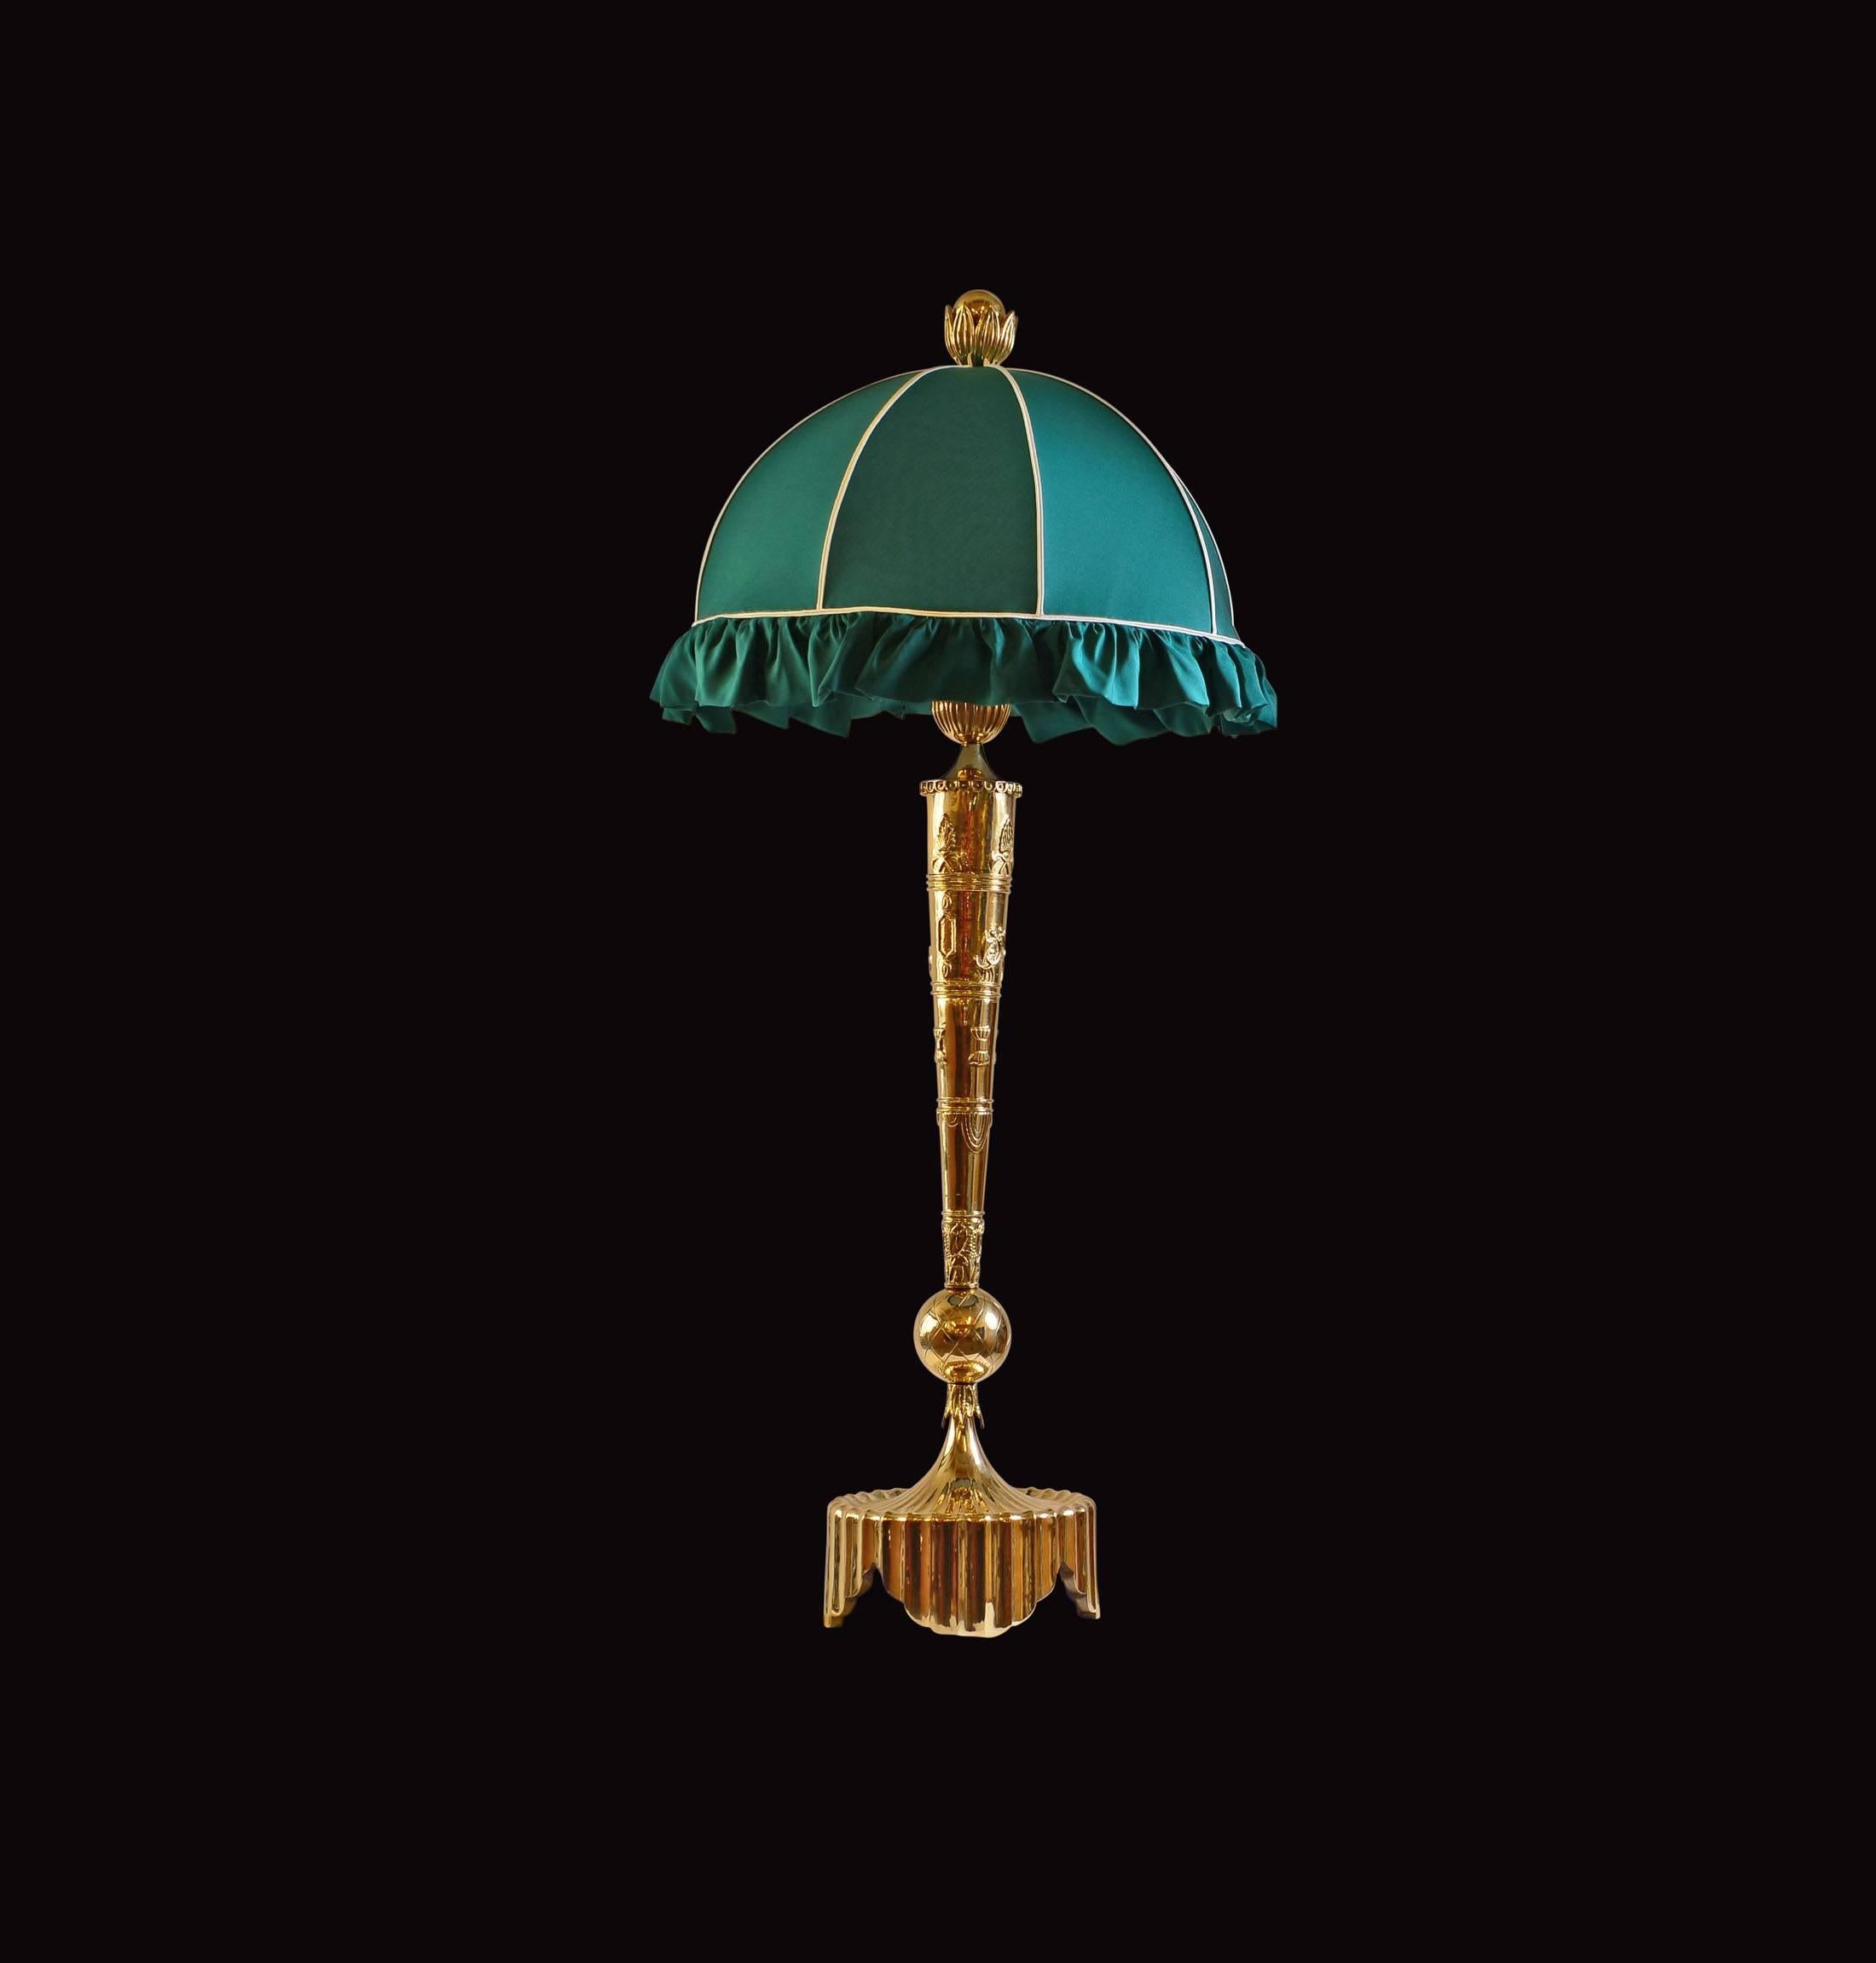 Tremendous and elaborate table lamp with for this outstanding designer typical ornaments

casted and forged brass, hand-sewn silk-shade

Most components according to the UL regulations, with an additional charge we will UL-list and label our